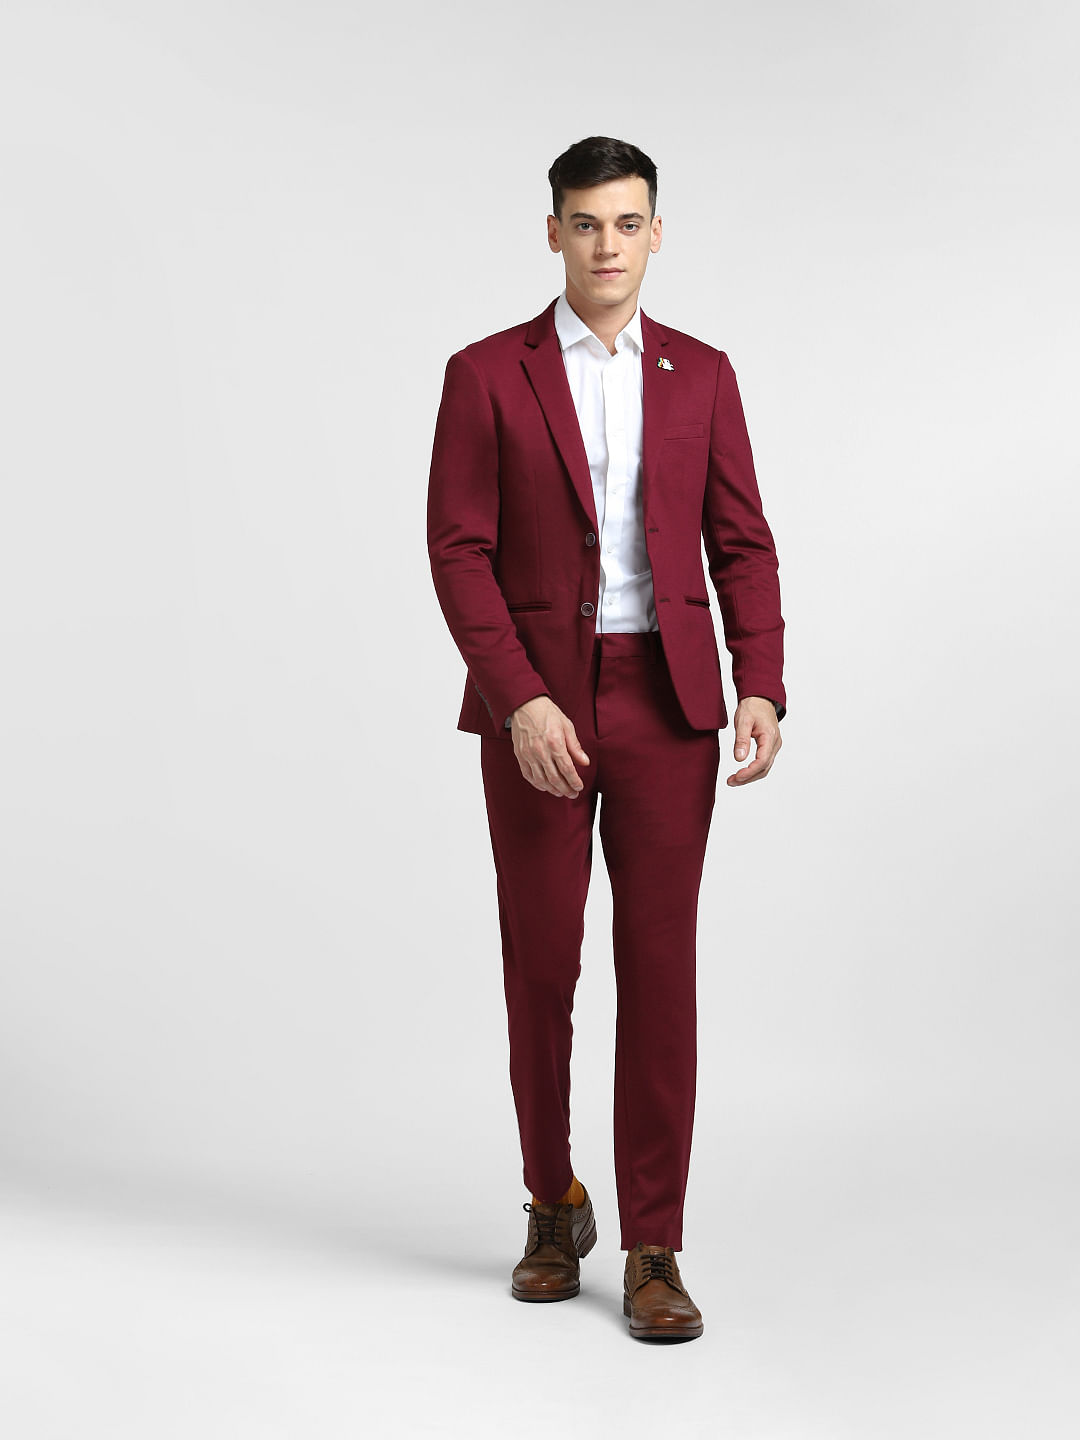 Formal Suits - Buy Formal Suits Online for Women at Best Prices in India